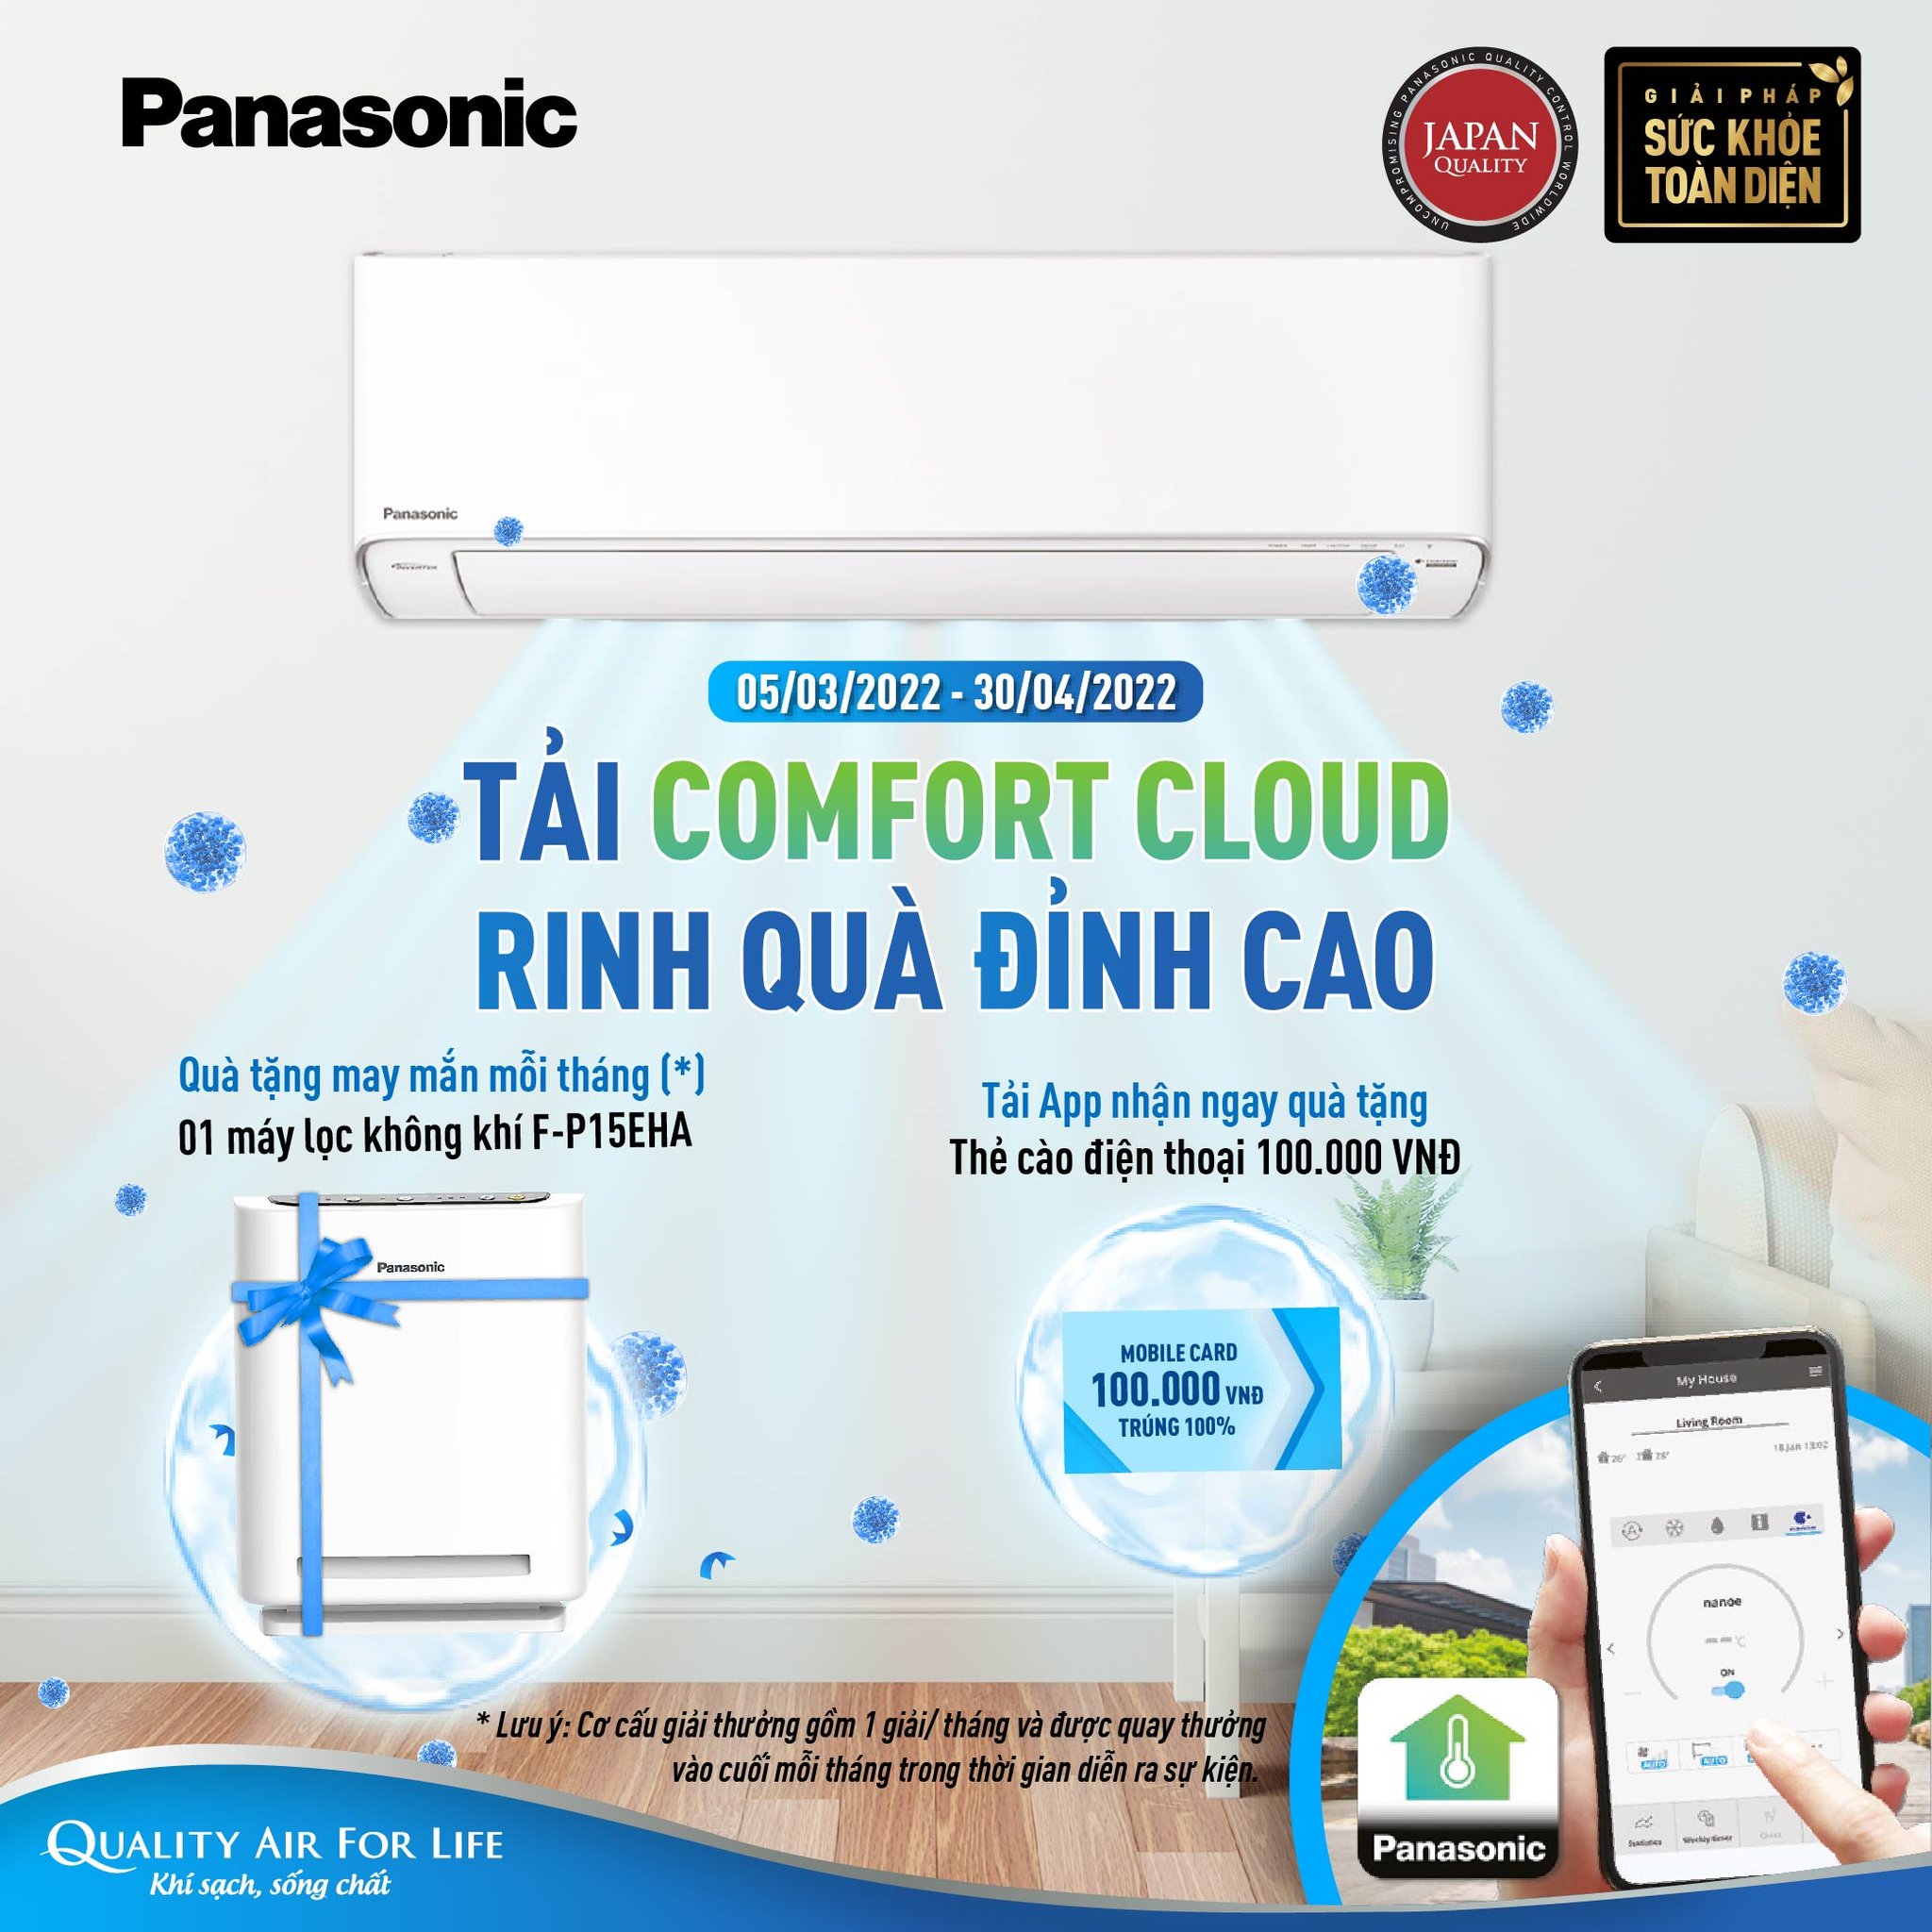 Download the Panasonic air conditioner control app through wifi to recieve gifts right away!